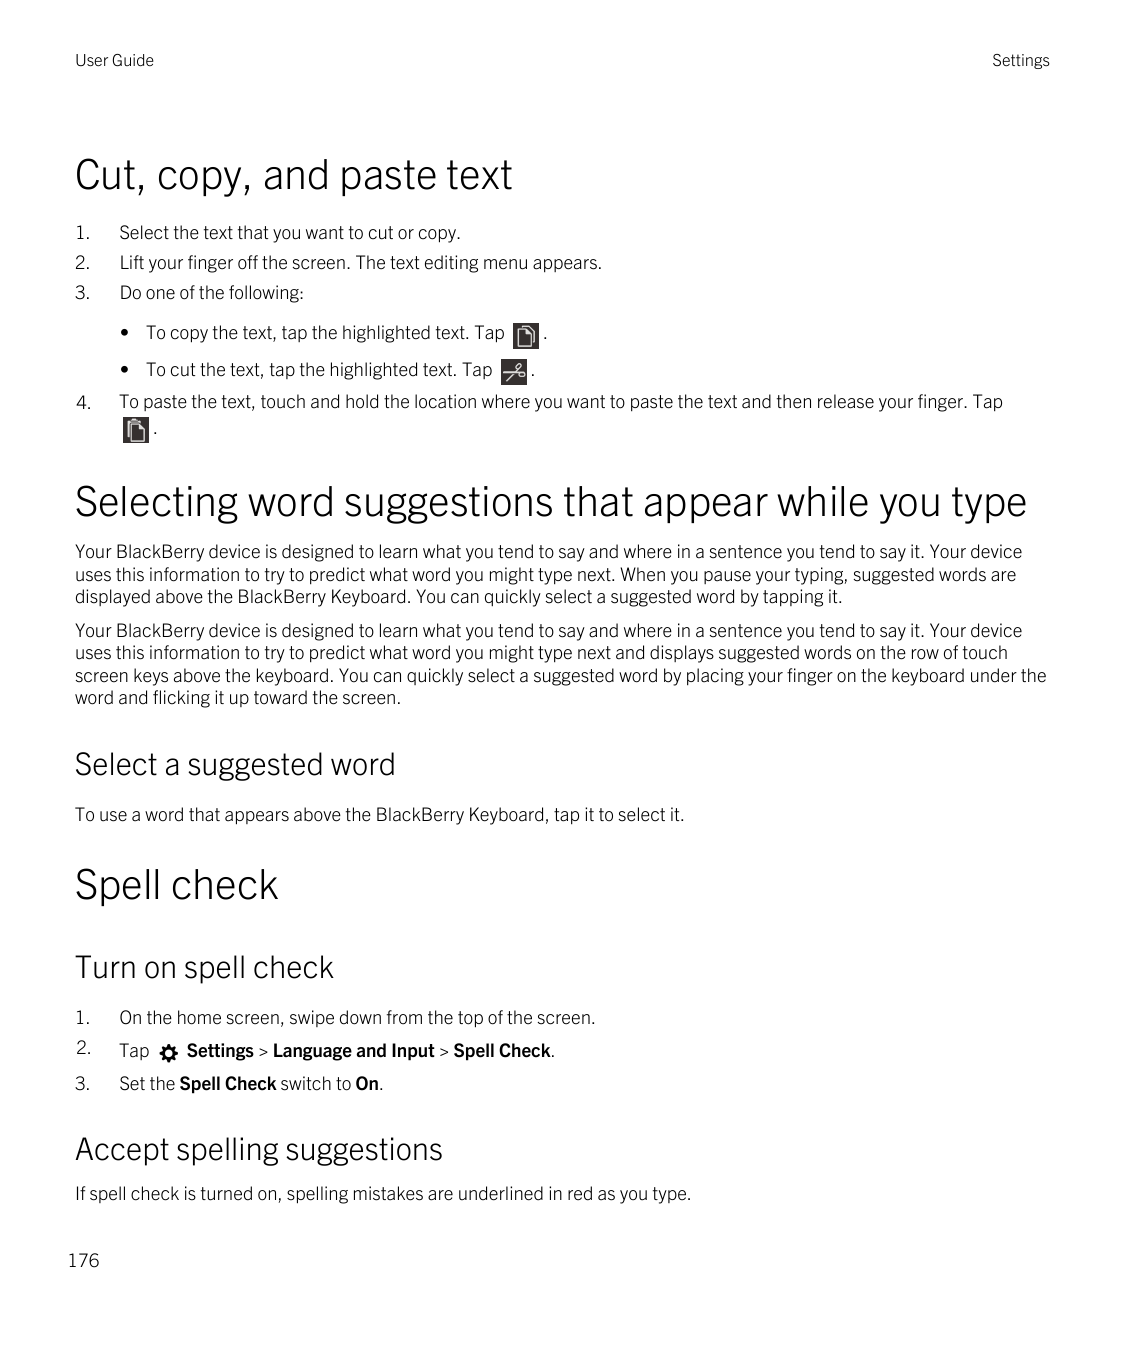 User GuideSettingsCut, copy, and paste text1.Select the text that you want to cut or copy.2.Lift your finger off the screen. The